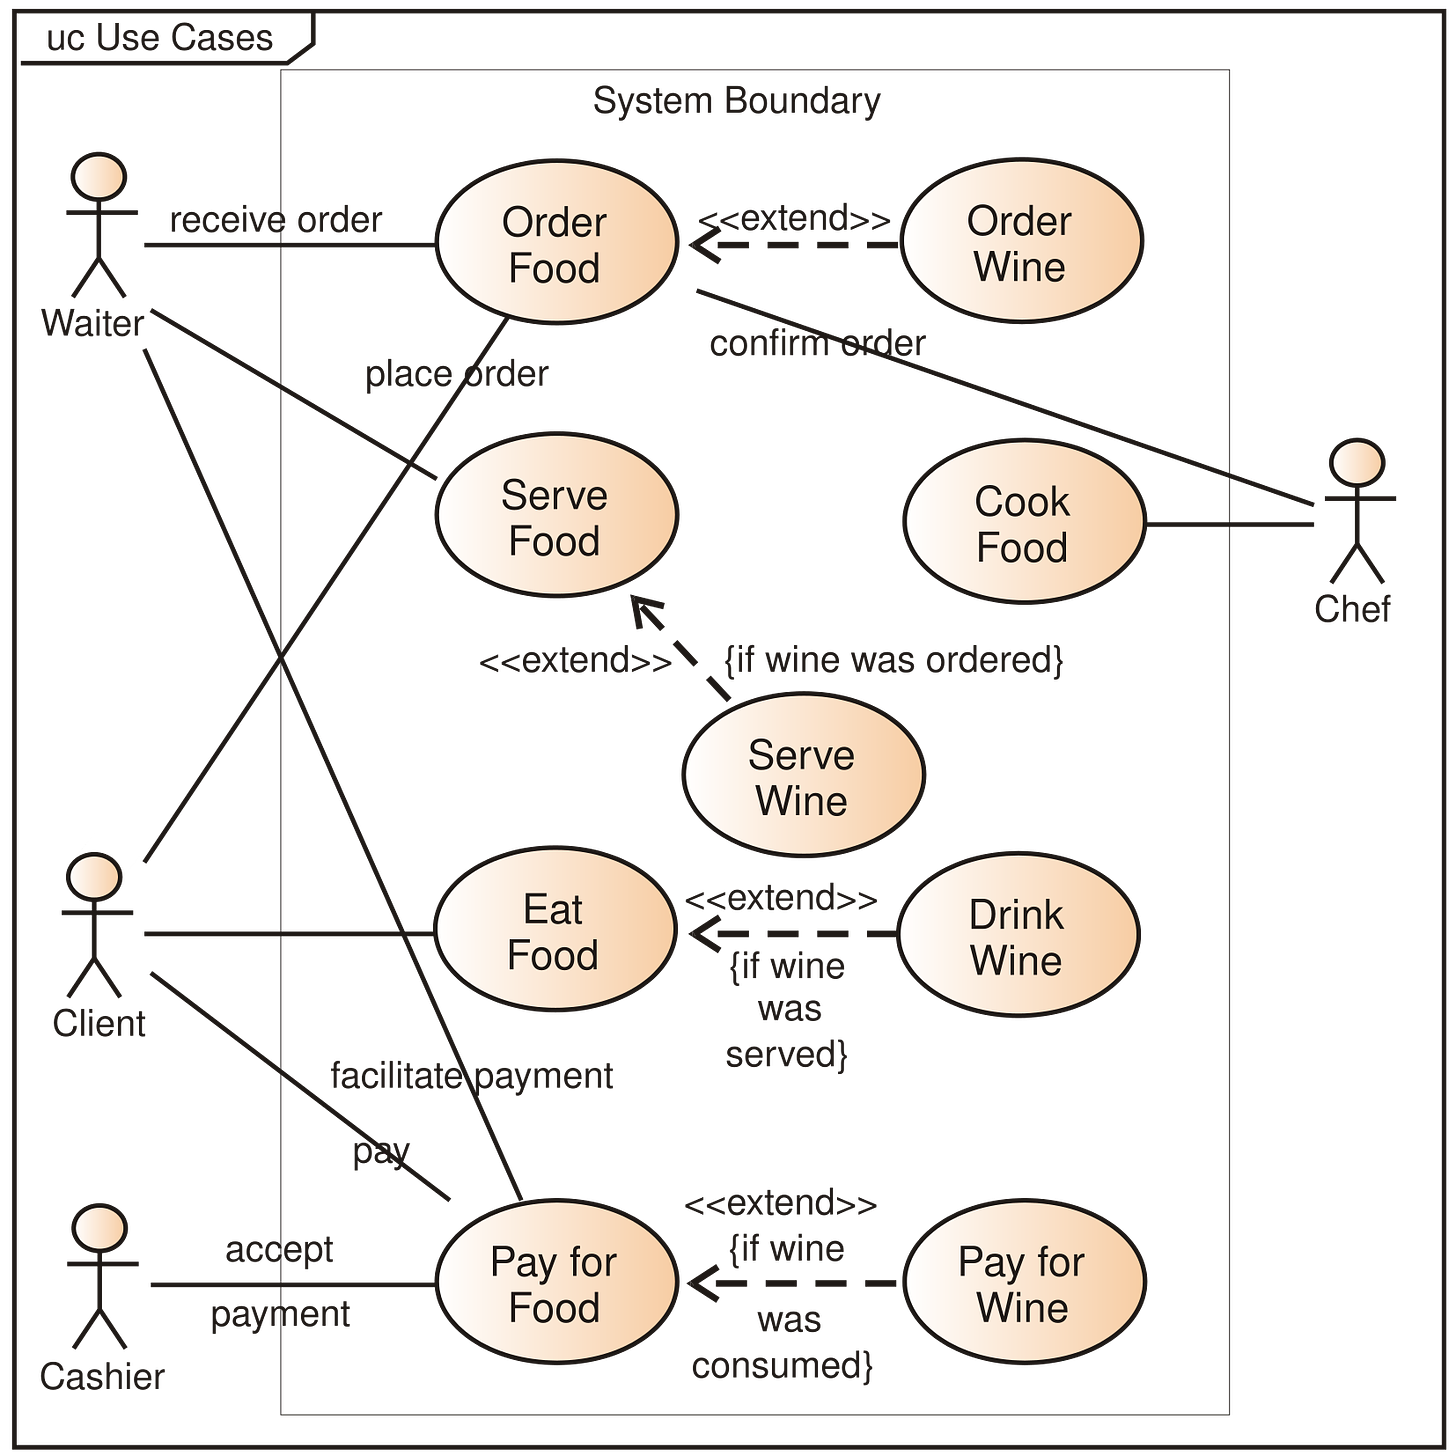 An example use case diagram showing the various elements of a restaurant system.